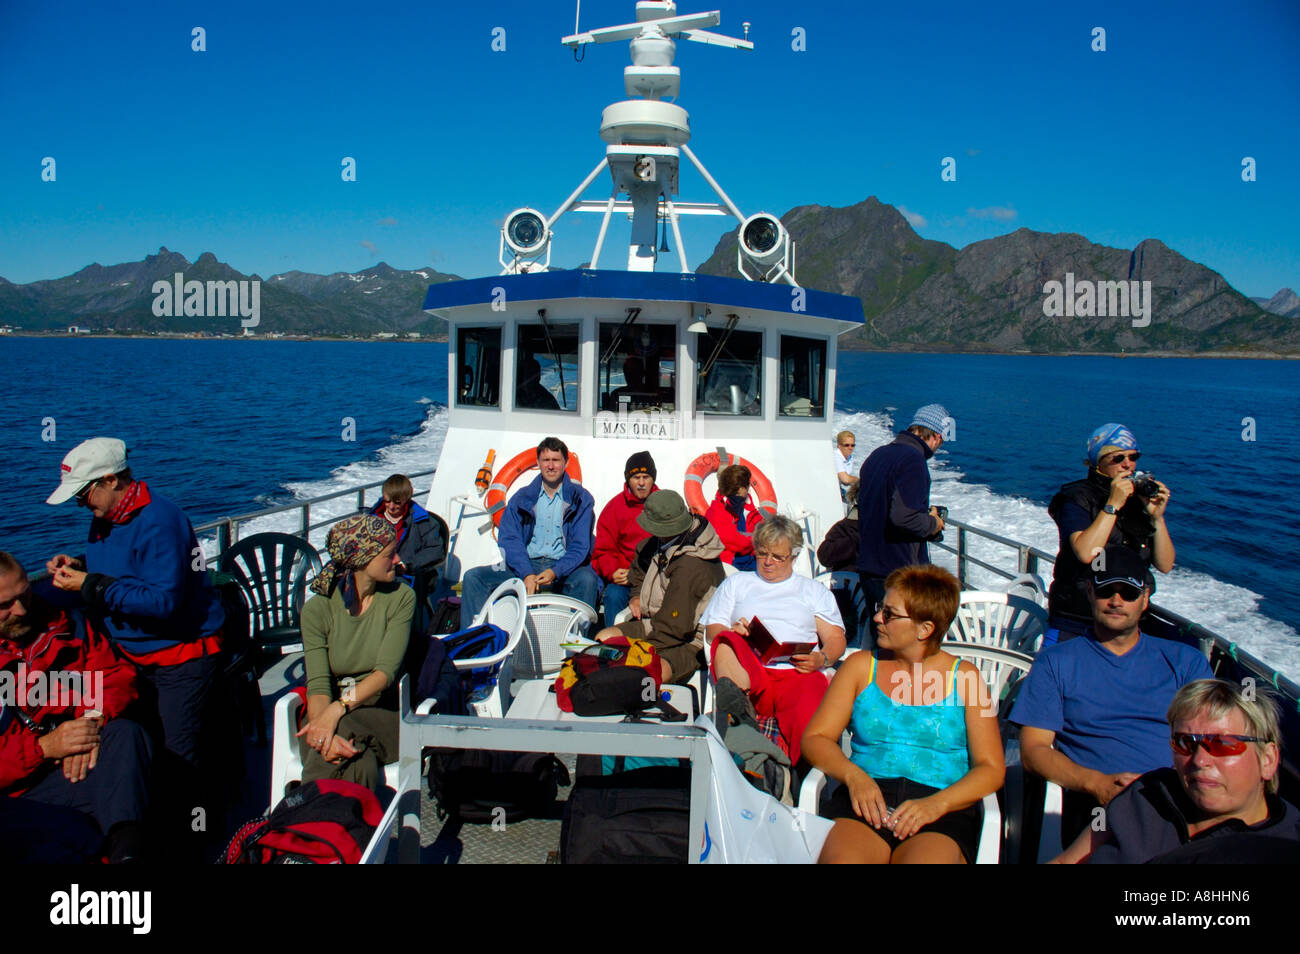 Passengers in the sun at deck of a sightseeing boat Lofoten Norway Stock Photo